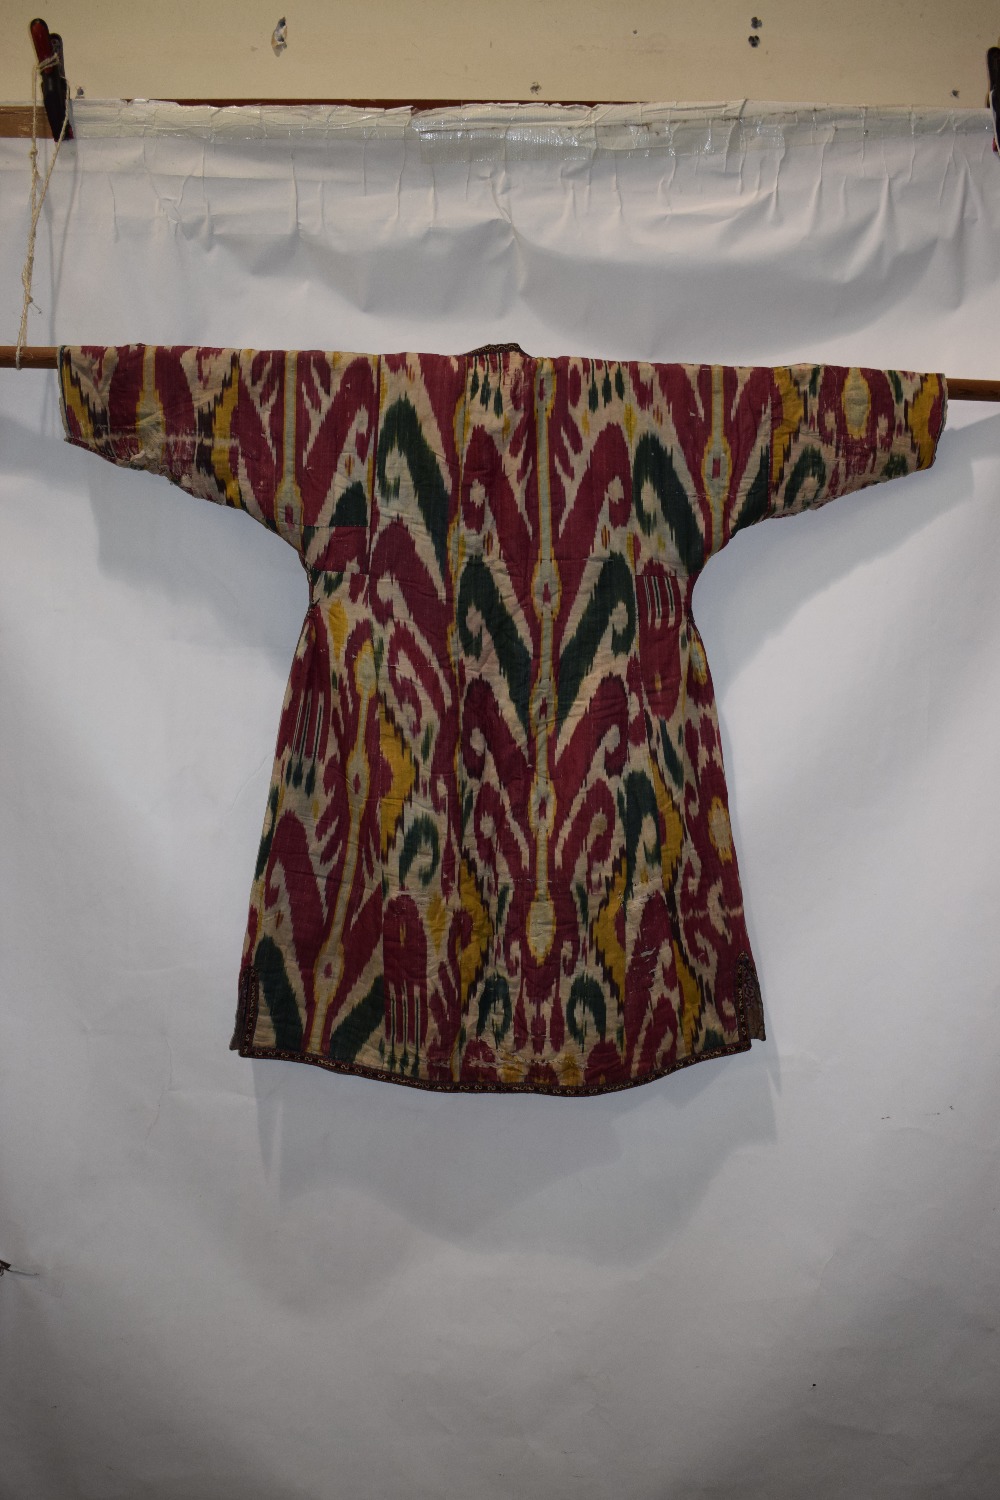 Uzbek silk ikat chapan, Uzbekistan, early 20th century, lined with printed cotton. With wear and - Image 11 of 11